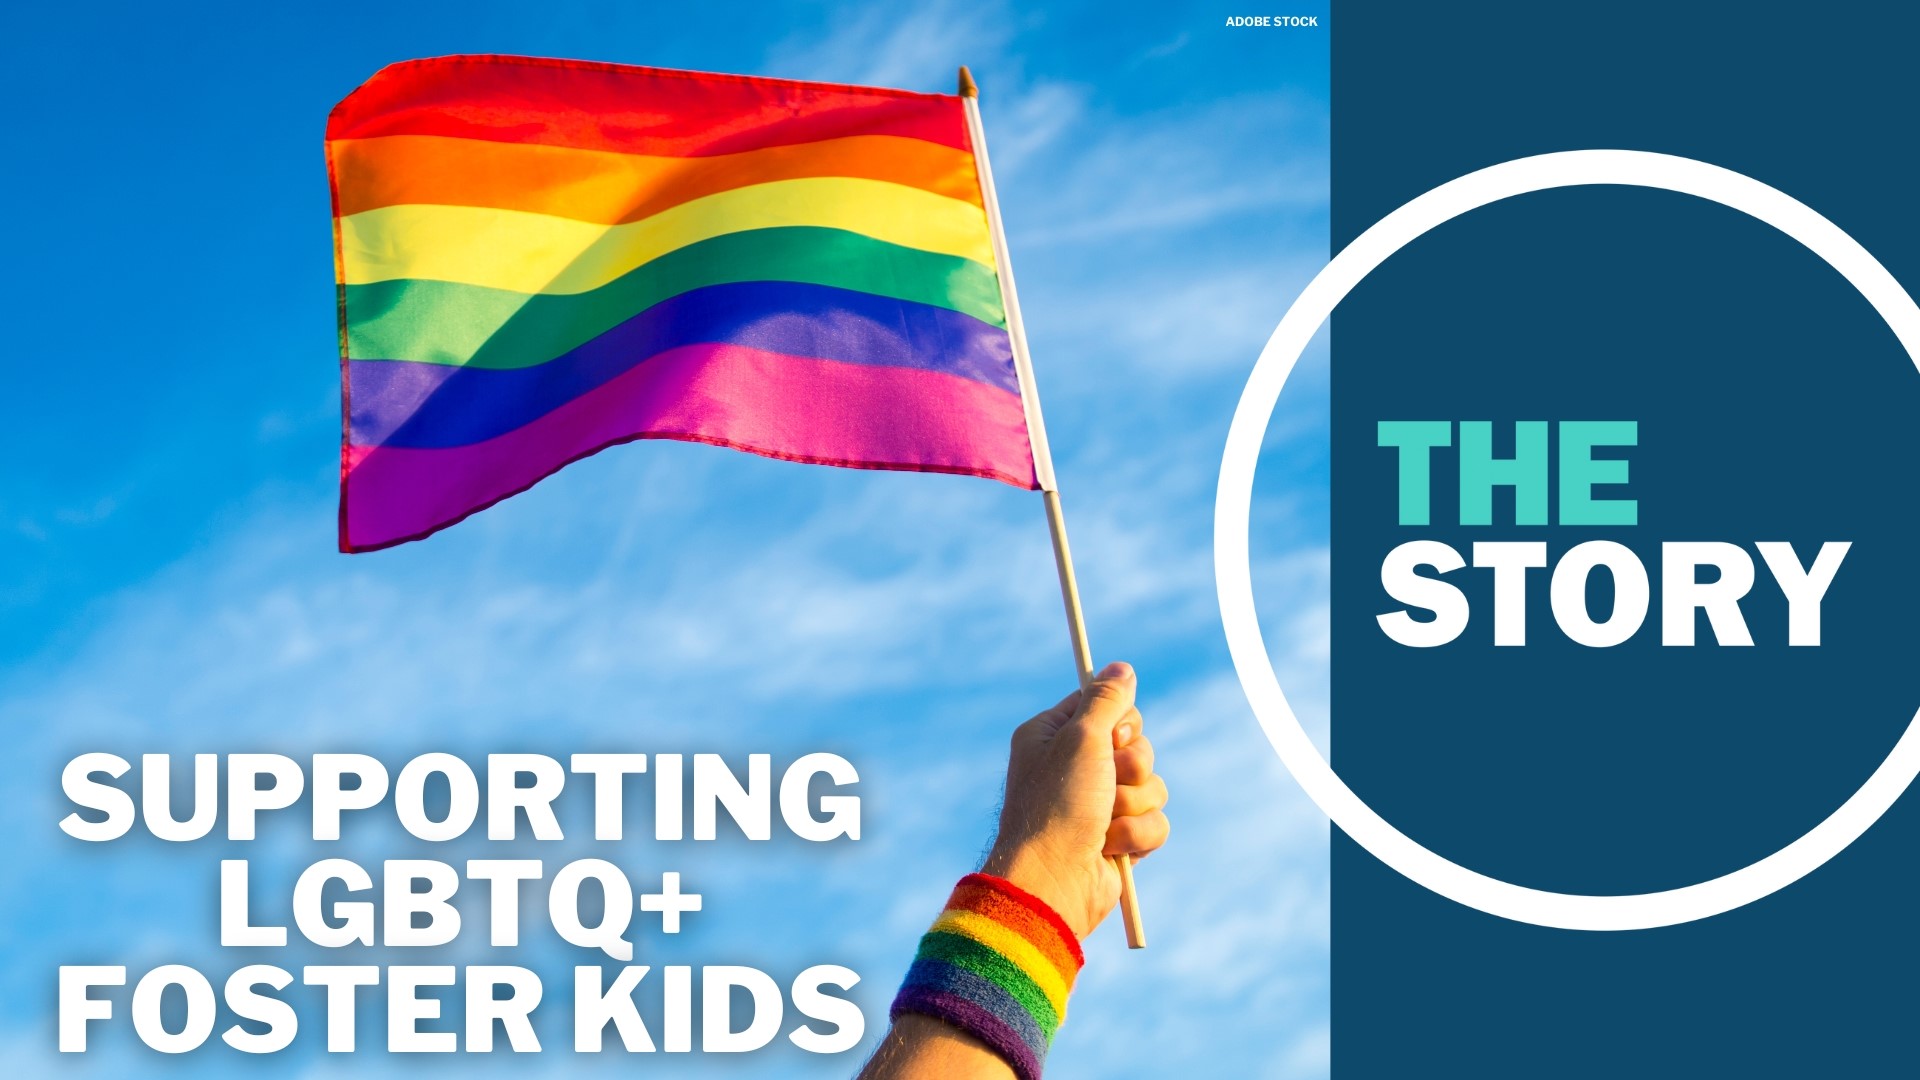 Oregon is one of 35 states with laws in place protecting foster youth from discrimination based on gender or sexual identity. Some states have no such rules.